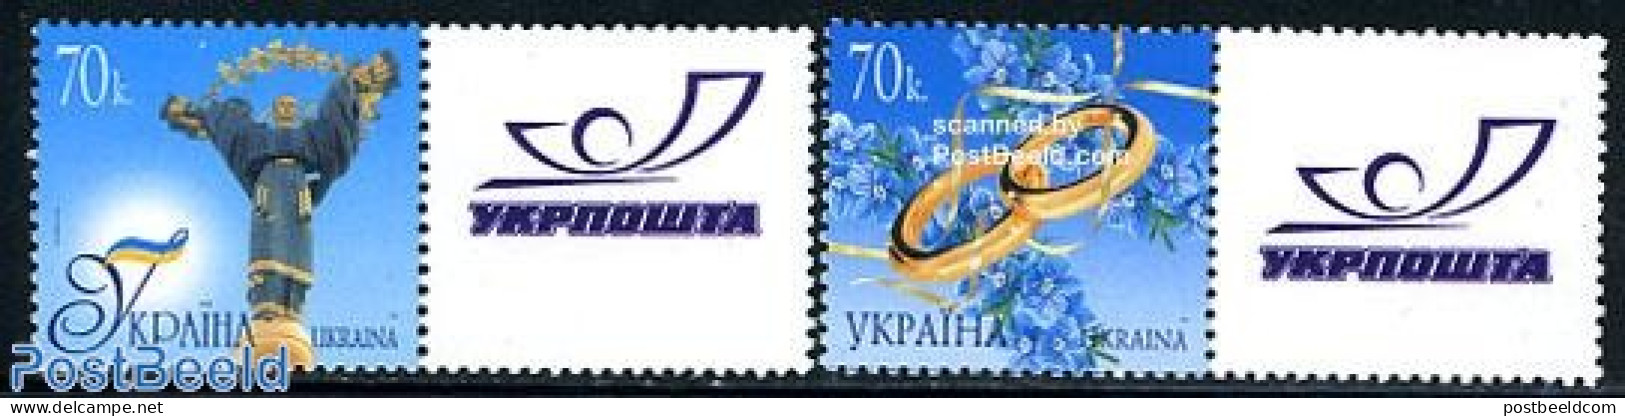 Ukraine 2007 Greeting Stamps With Personal Tabs 2v, Mint NH, Various - Greetings & Wishing Stamps - Ukraine